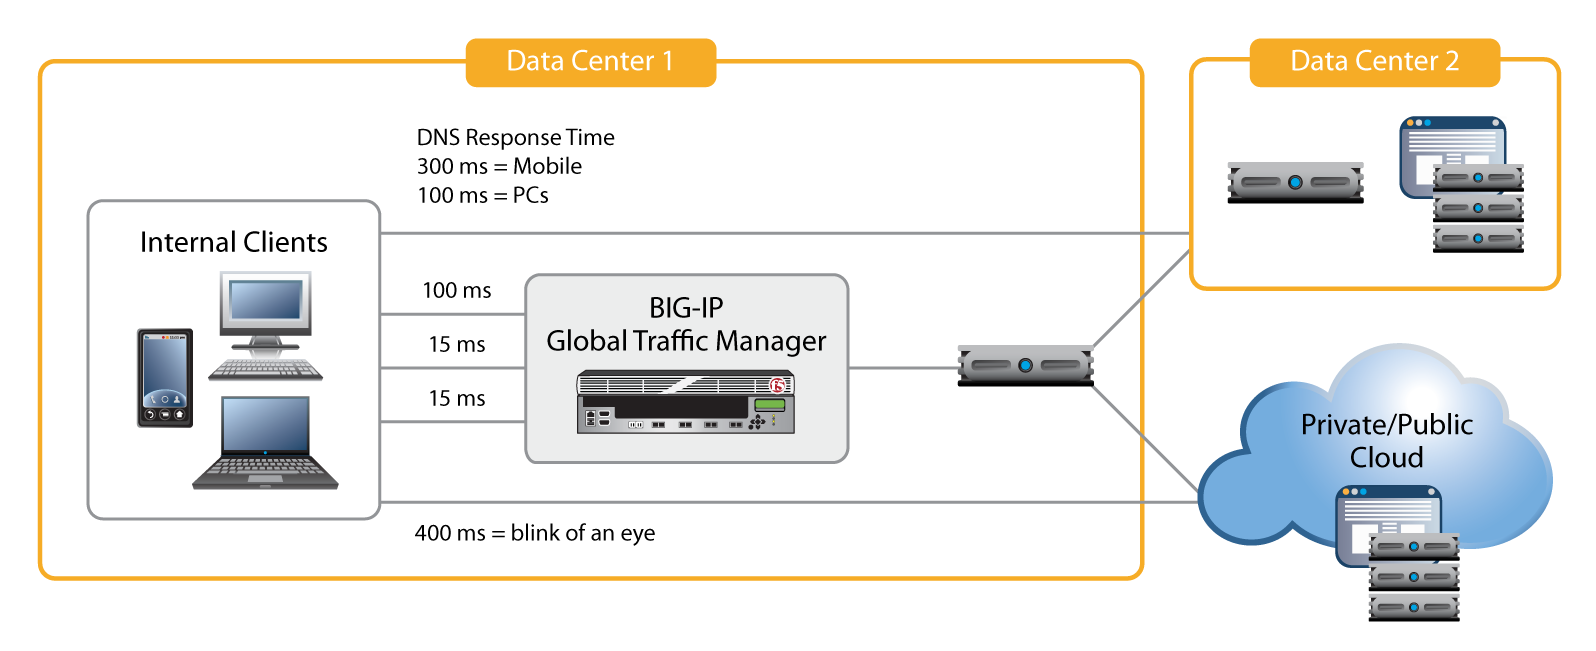 BIG-IP GTM enhances user experience through scalable, high-performance DNS caching and resolving.